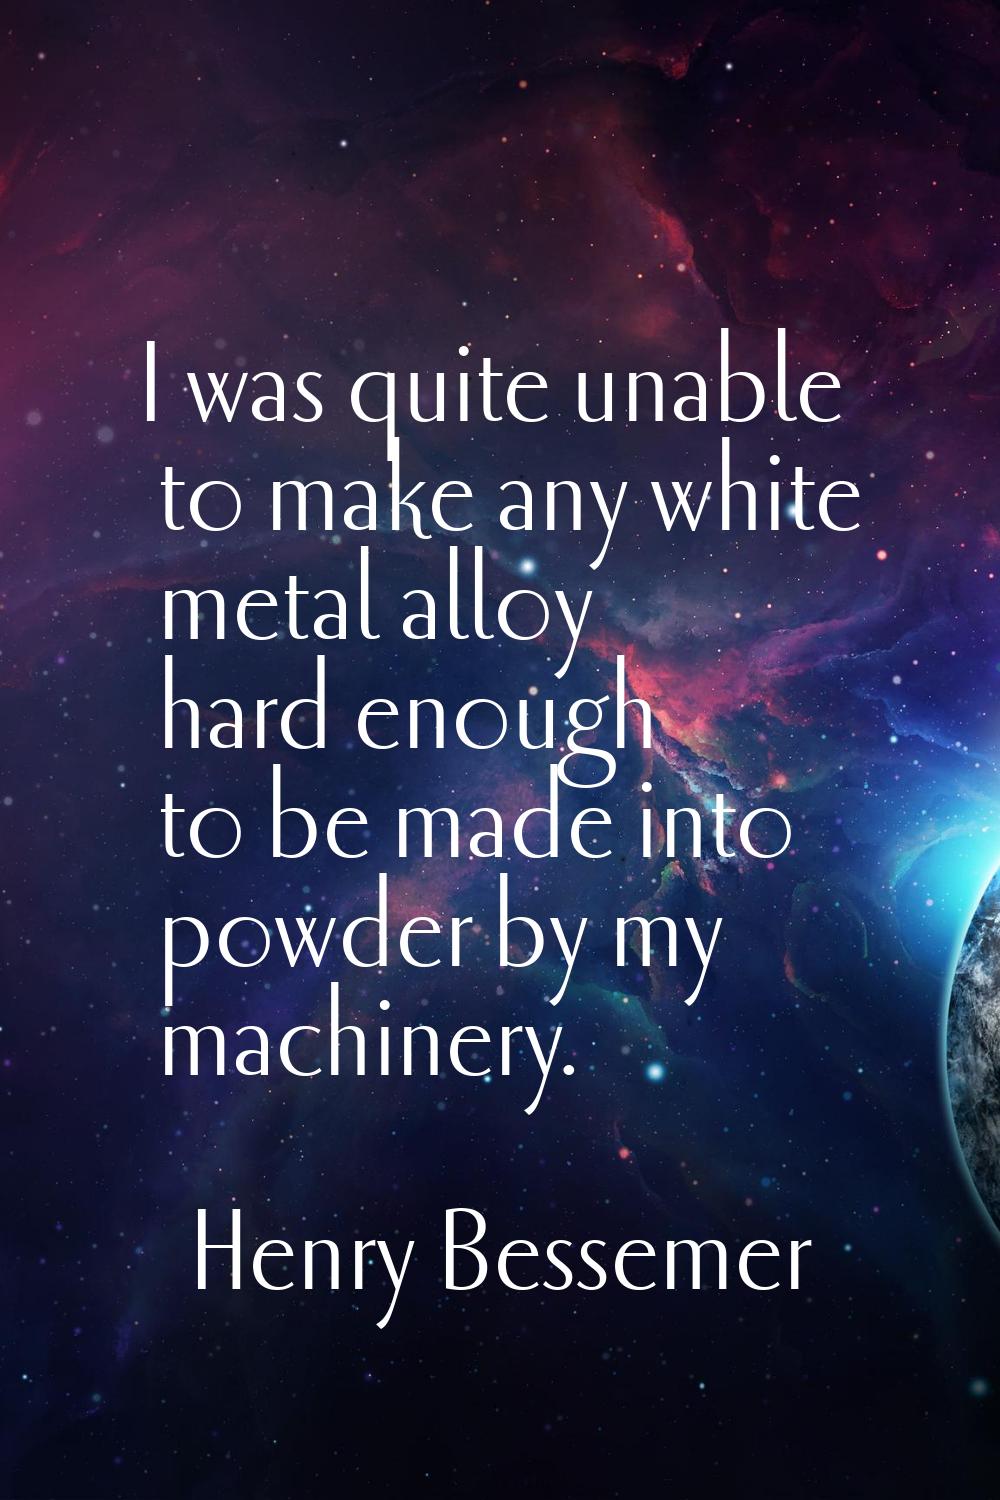 I was quite unable to make any white metal alloy hard enough to be made into powder by my machinery